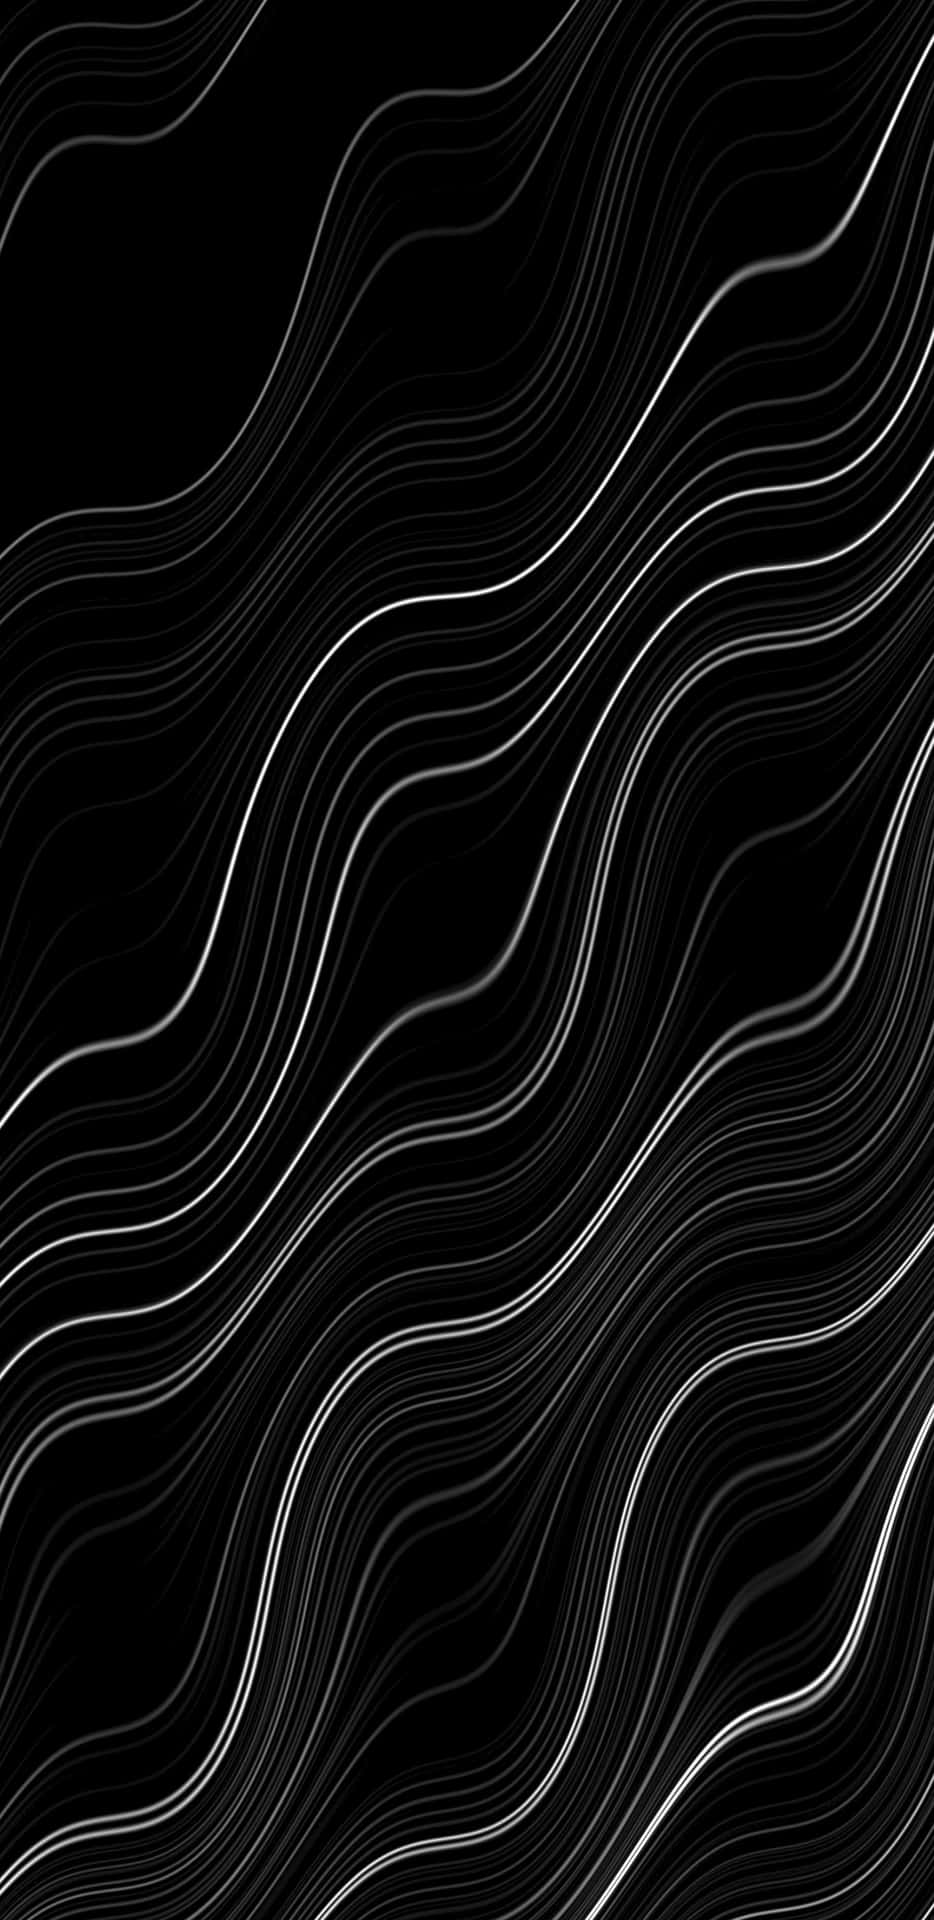 A Black And White Wavy Background Wallpaper